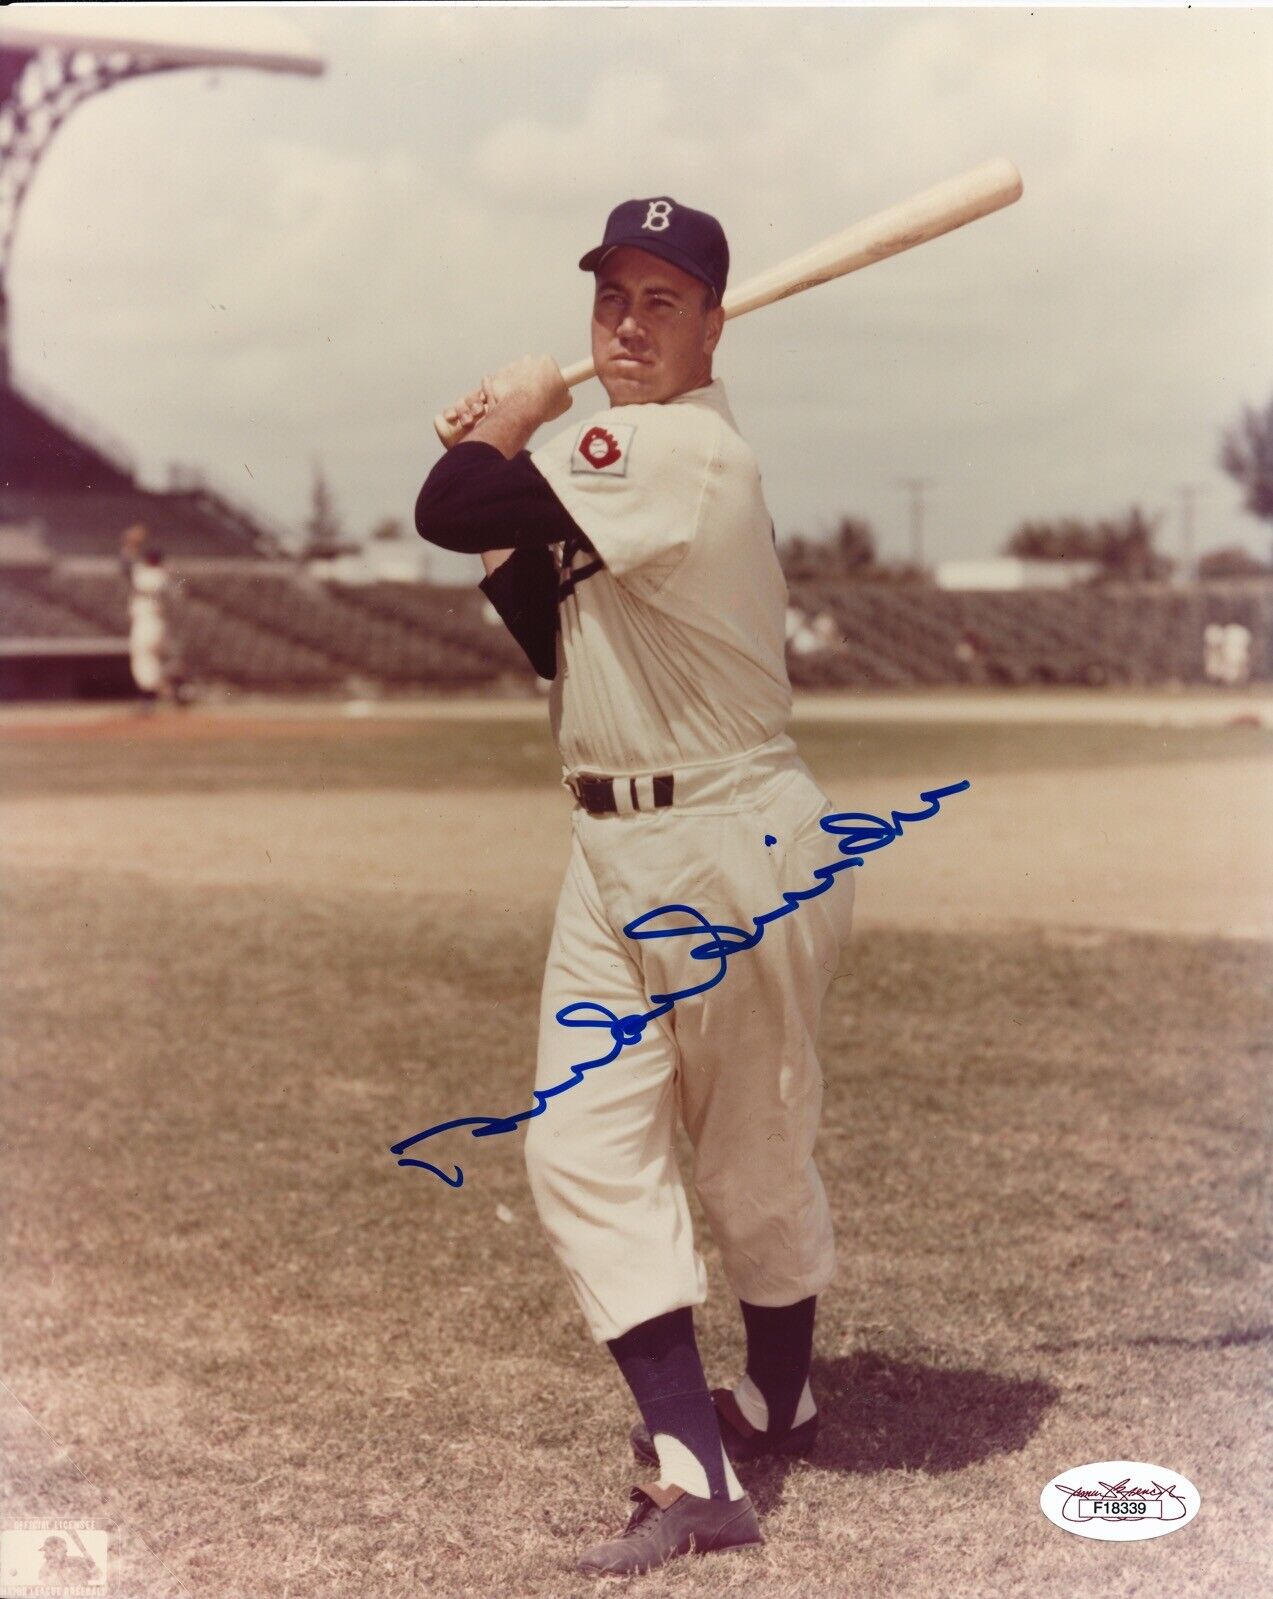 Duke Snider (HOF) Signed and Authenticated (JSA) 8x10 Photo - Dodgers 